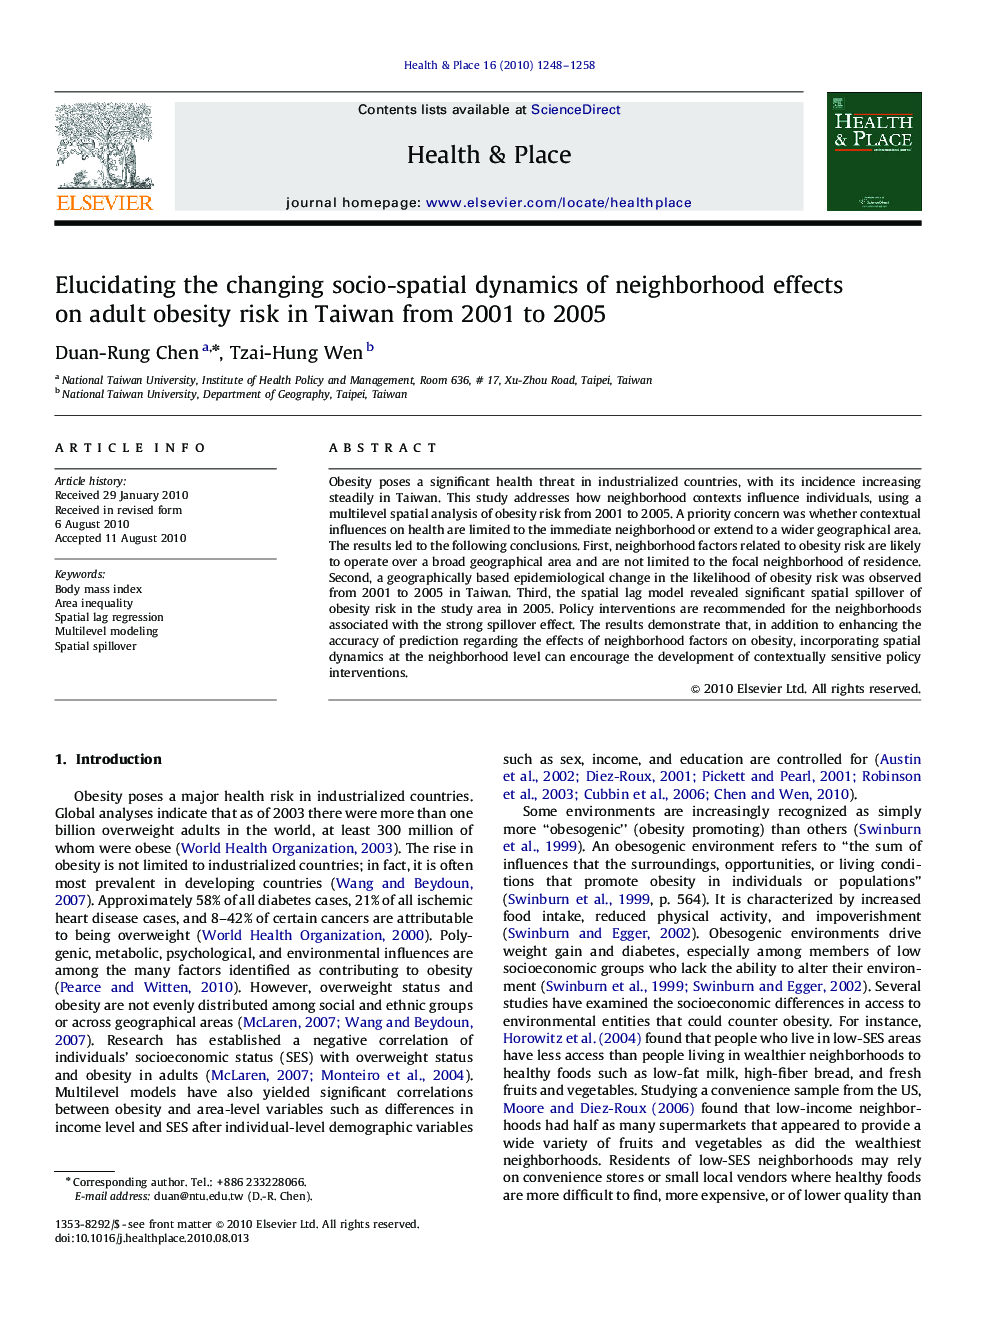 Elucidating the changing socio-spatial dynamics of neighborhood effects on adult obesity risk in Taiwan from 2001 to 2005